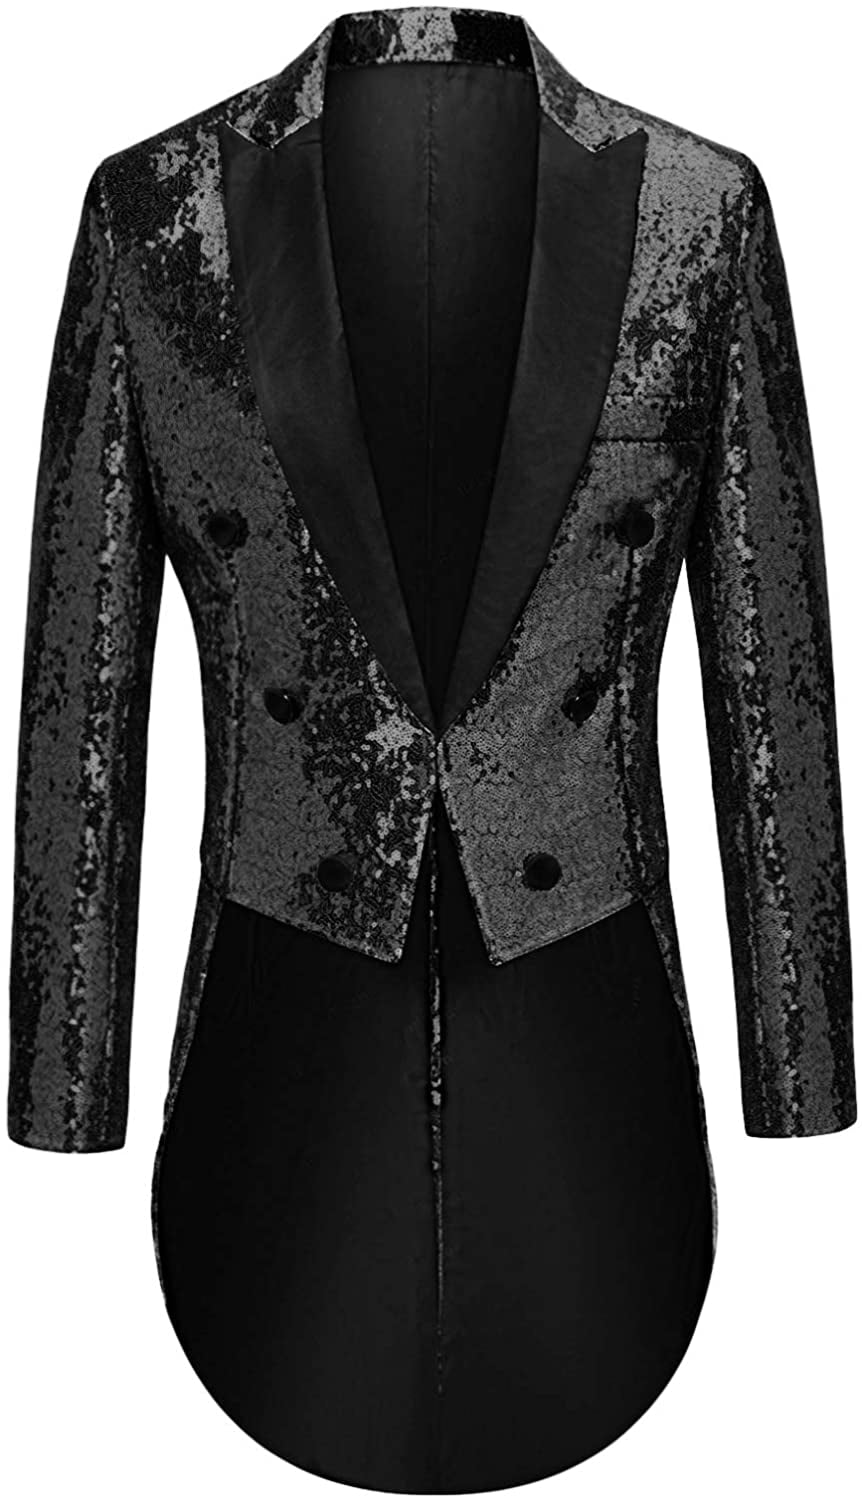 MAGE MALE Mens Sequin Tuxedo Jacket Tails Slim Fit Tailcoat Dress Coat Swallowtail Dinner Party Wedding Blazer Suit Jacket 